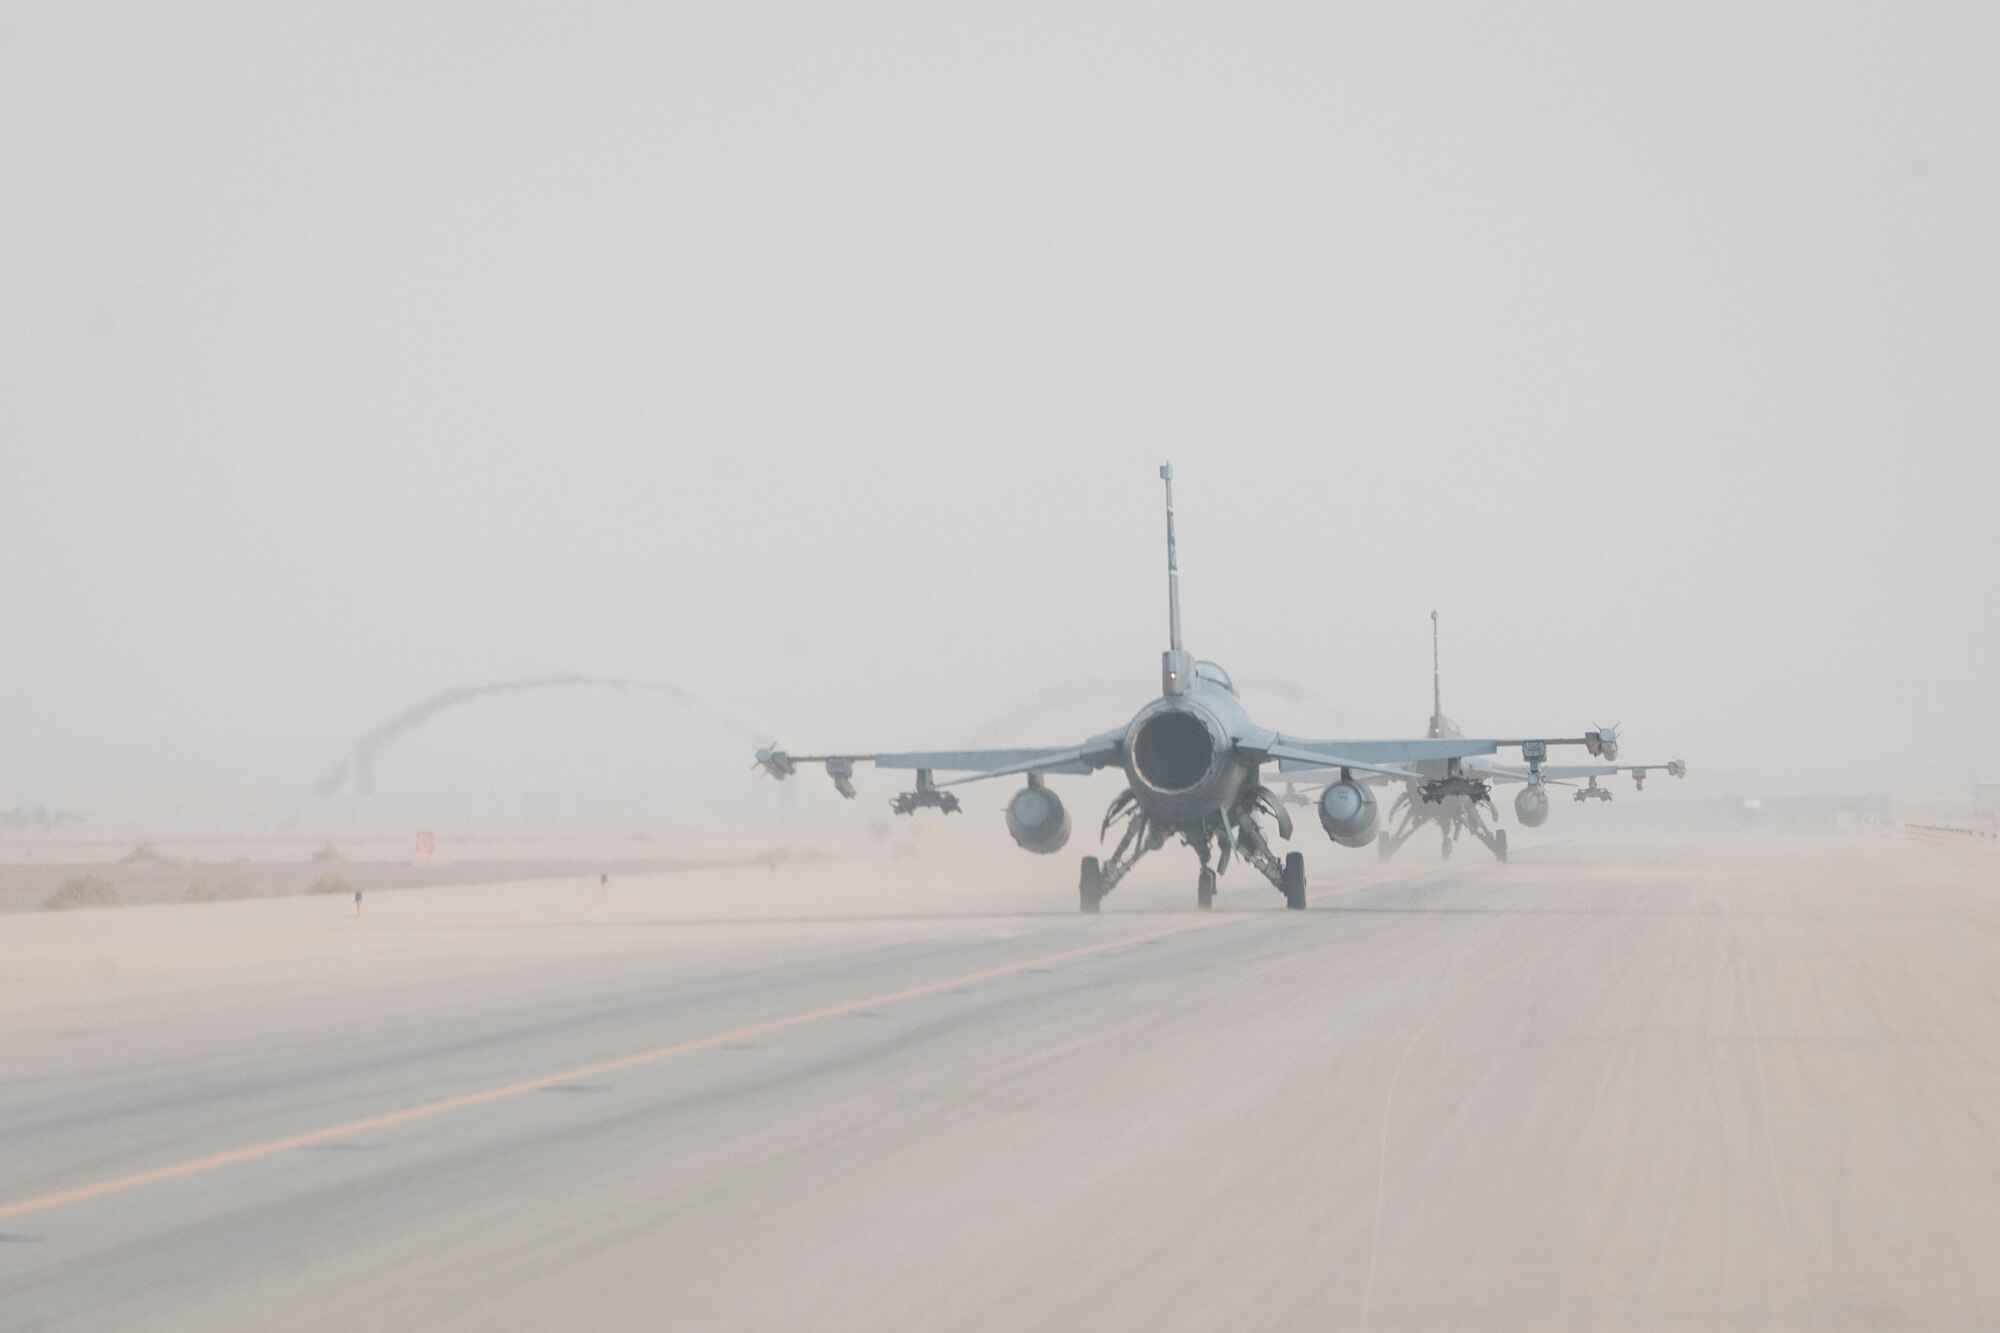 U.S. Air Force F-16 Fighting Falcons taxi in preparation for take-off during a partner nation integration mission with the Royal Saudi Air Force with the Royal Saudi Air Force at Prince Sultan Air Base, Kingdom of Saudi Arabia, June 17, 2021. U.S. Air Forces Central aircraft regularly work with coalition and partner nations to test their collective counter-UAS capabilities to ensure the security and stability of regional airspace. (U.S. Air Force photo by Staff Sgt. Caleb Pavao)